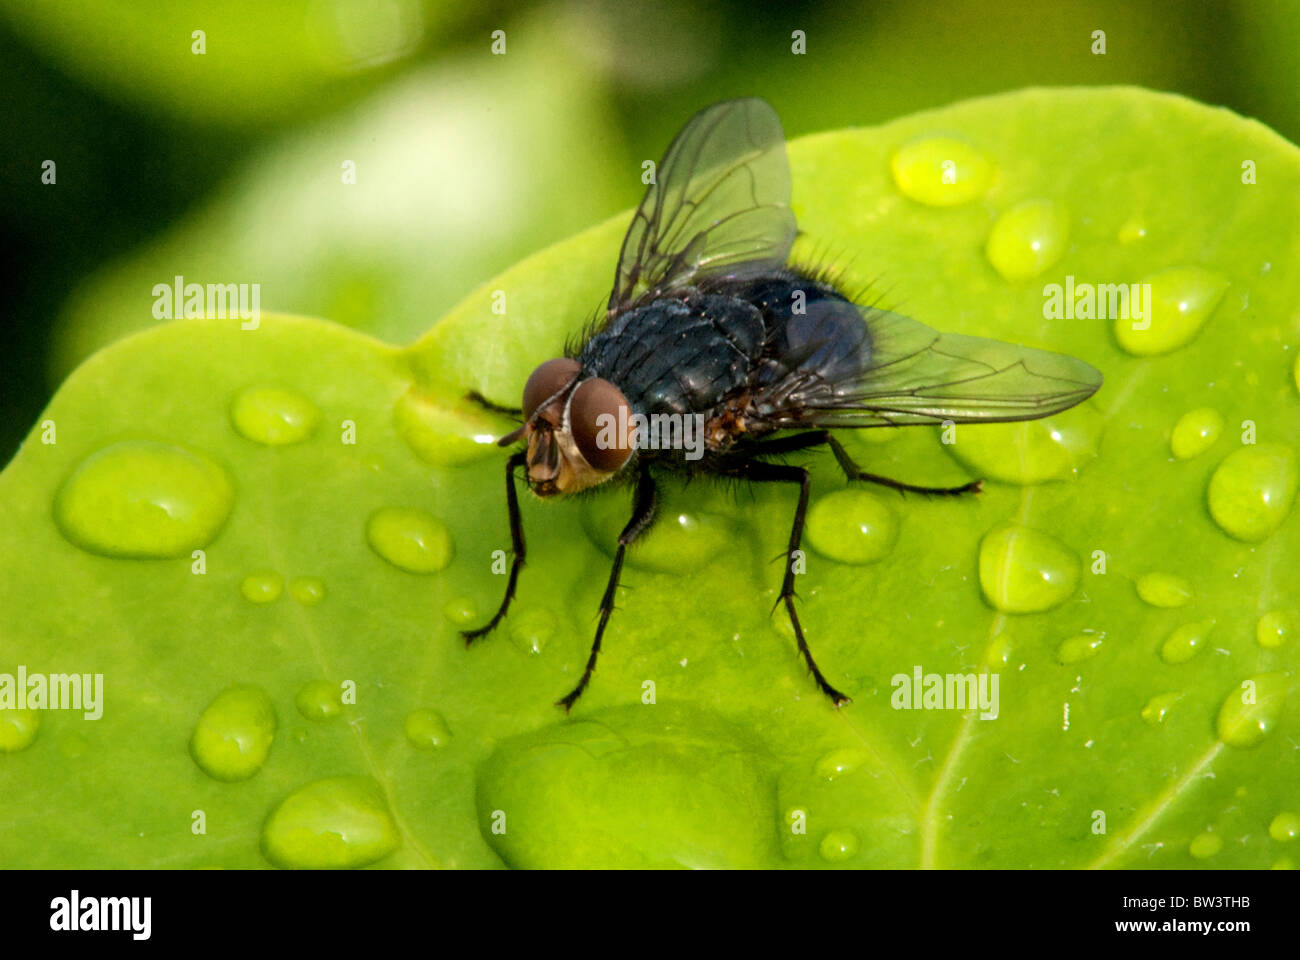 Black Fly on a Wet Green Leaf in Cannes, France Stock Photo